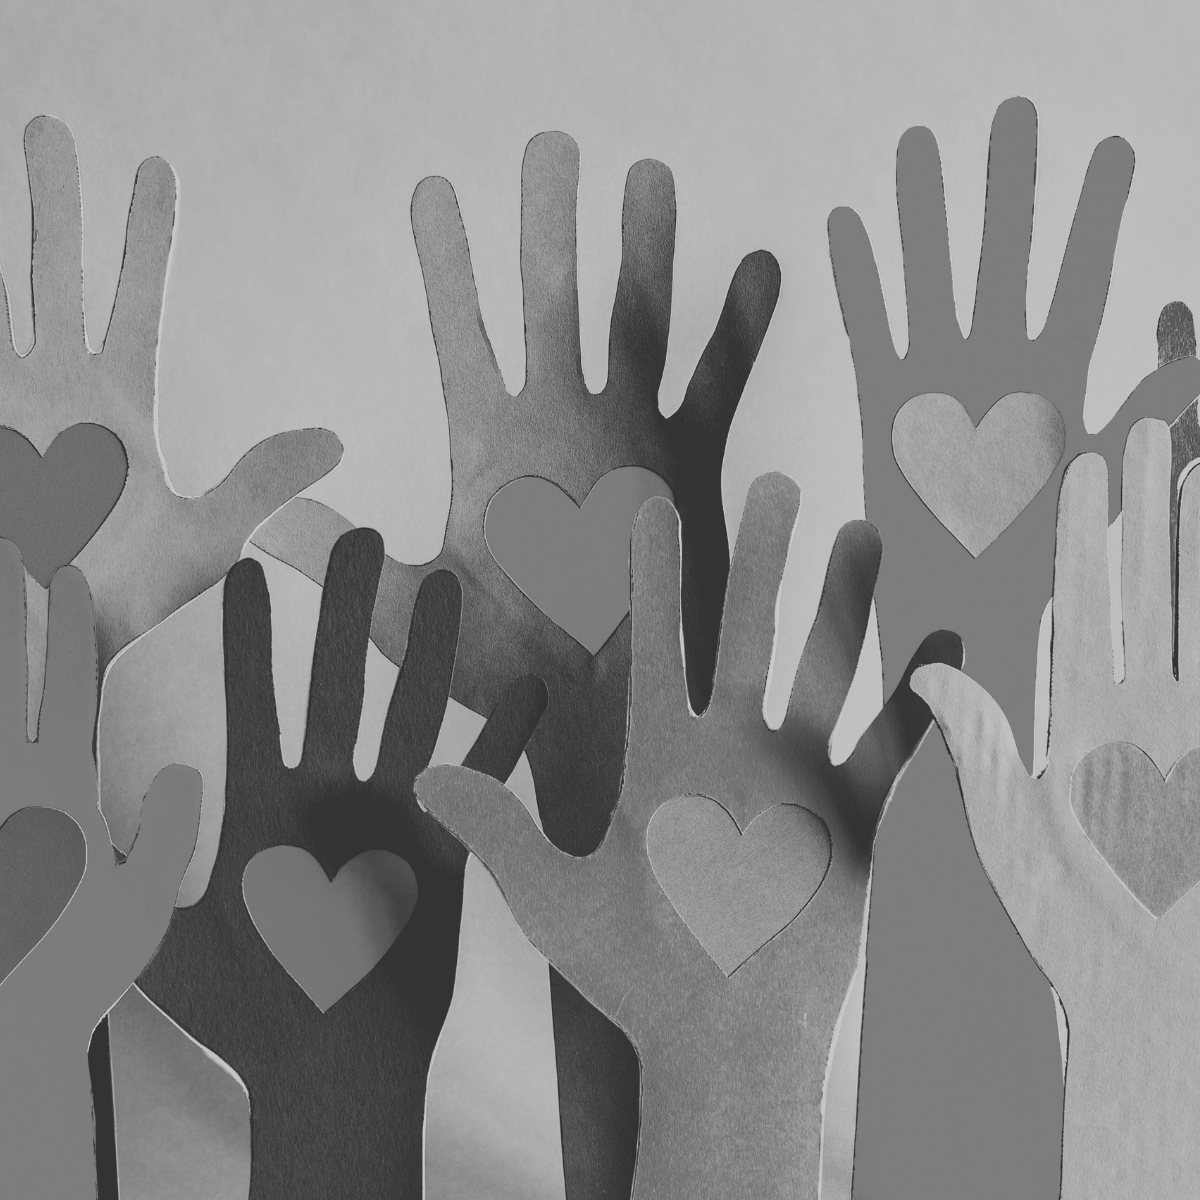 paper hands raised with hearts in them in black and white